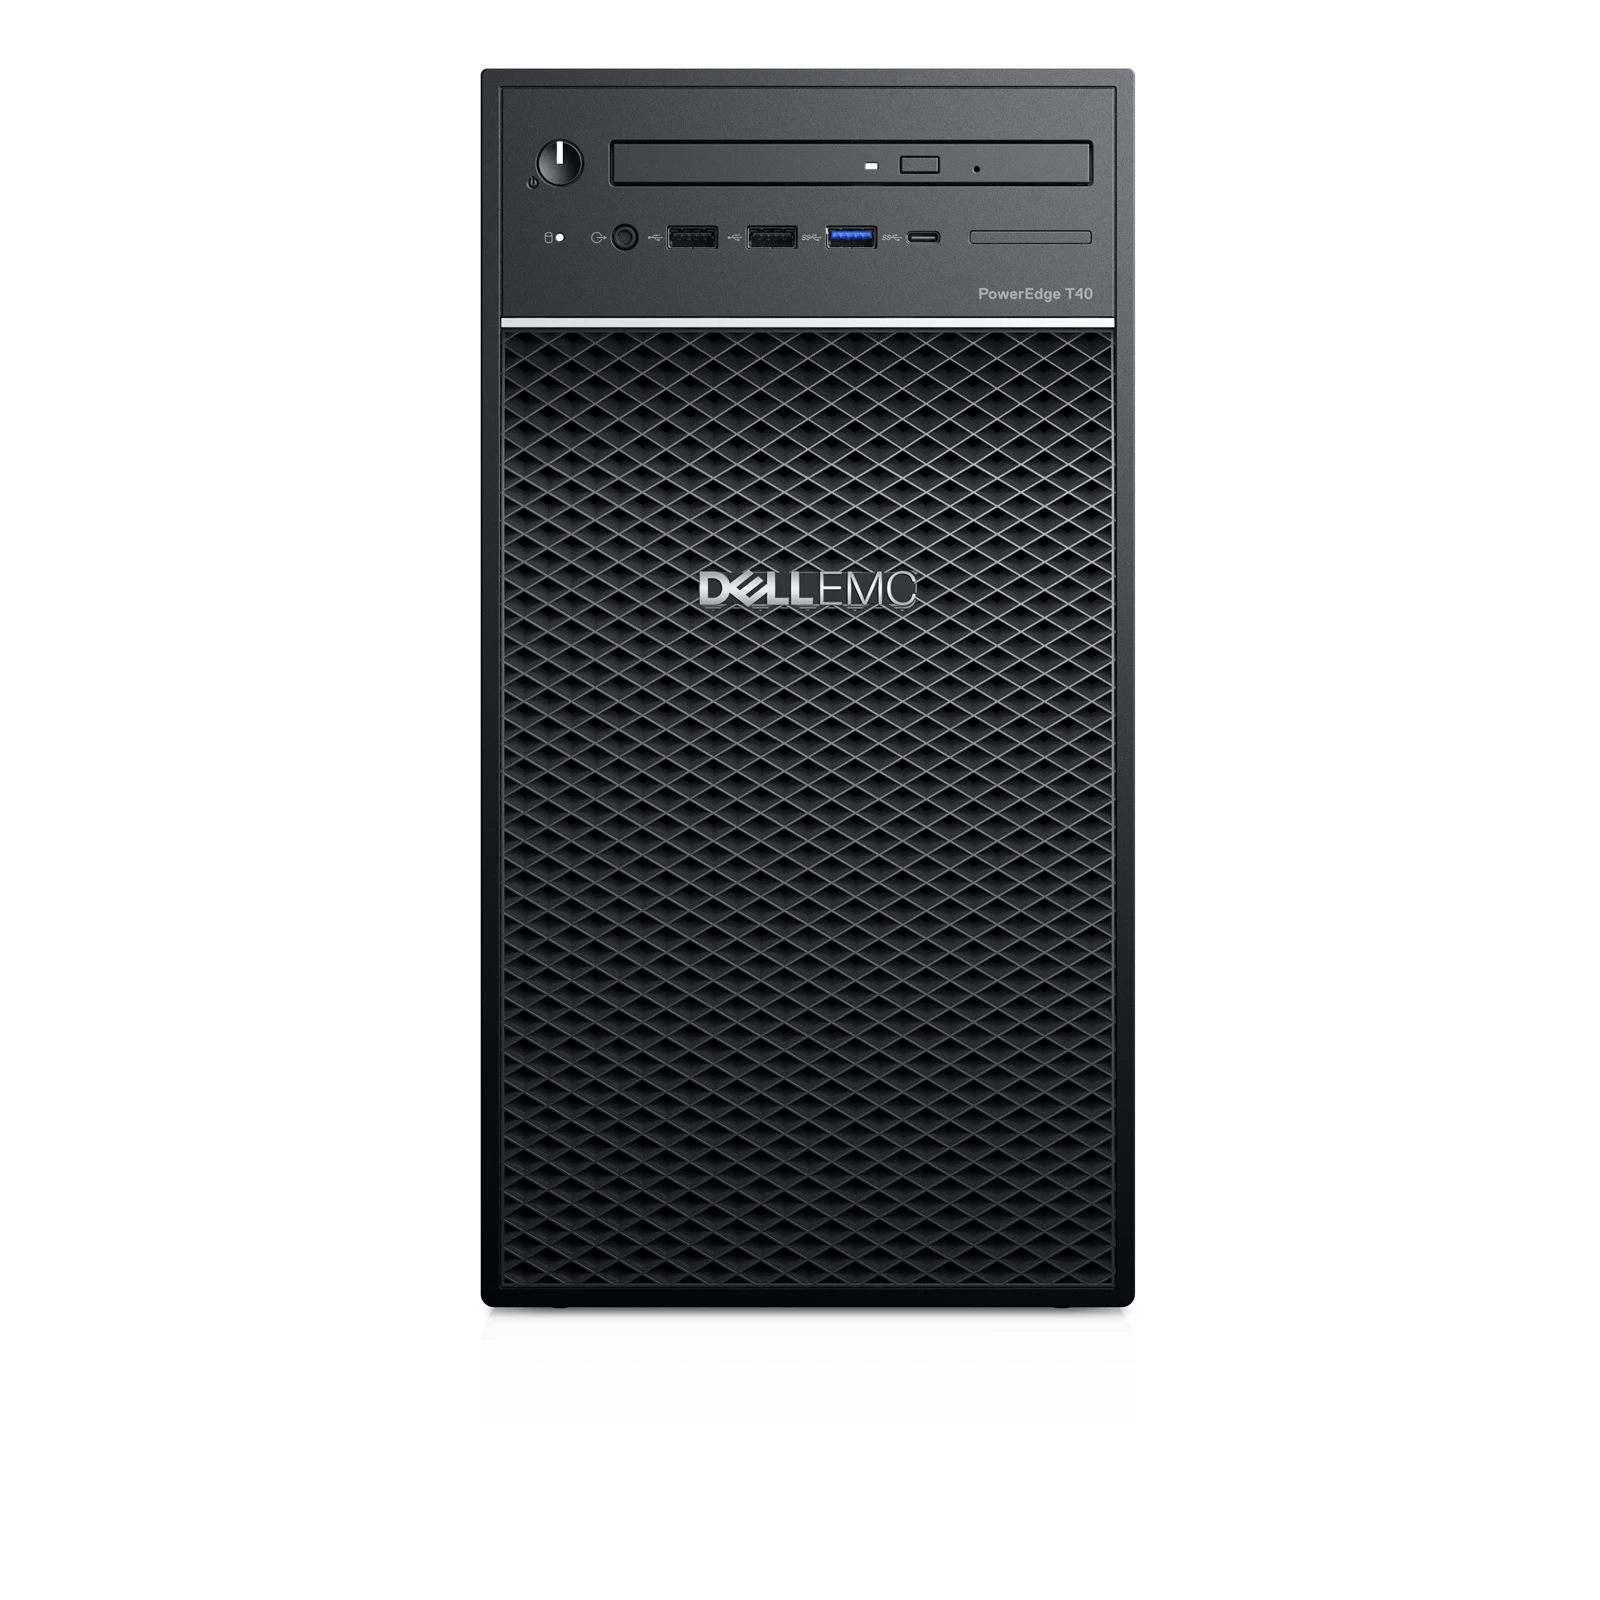 

Original PowerEdge T40 Tower server Xeon E-2224G 4core 3.5Ghz, 8GB memory, 1TB HDD, For dell